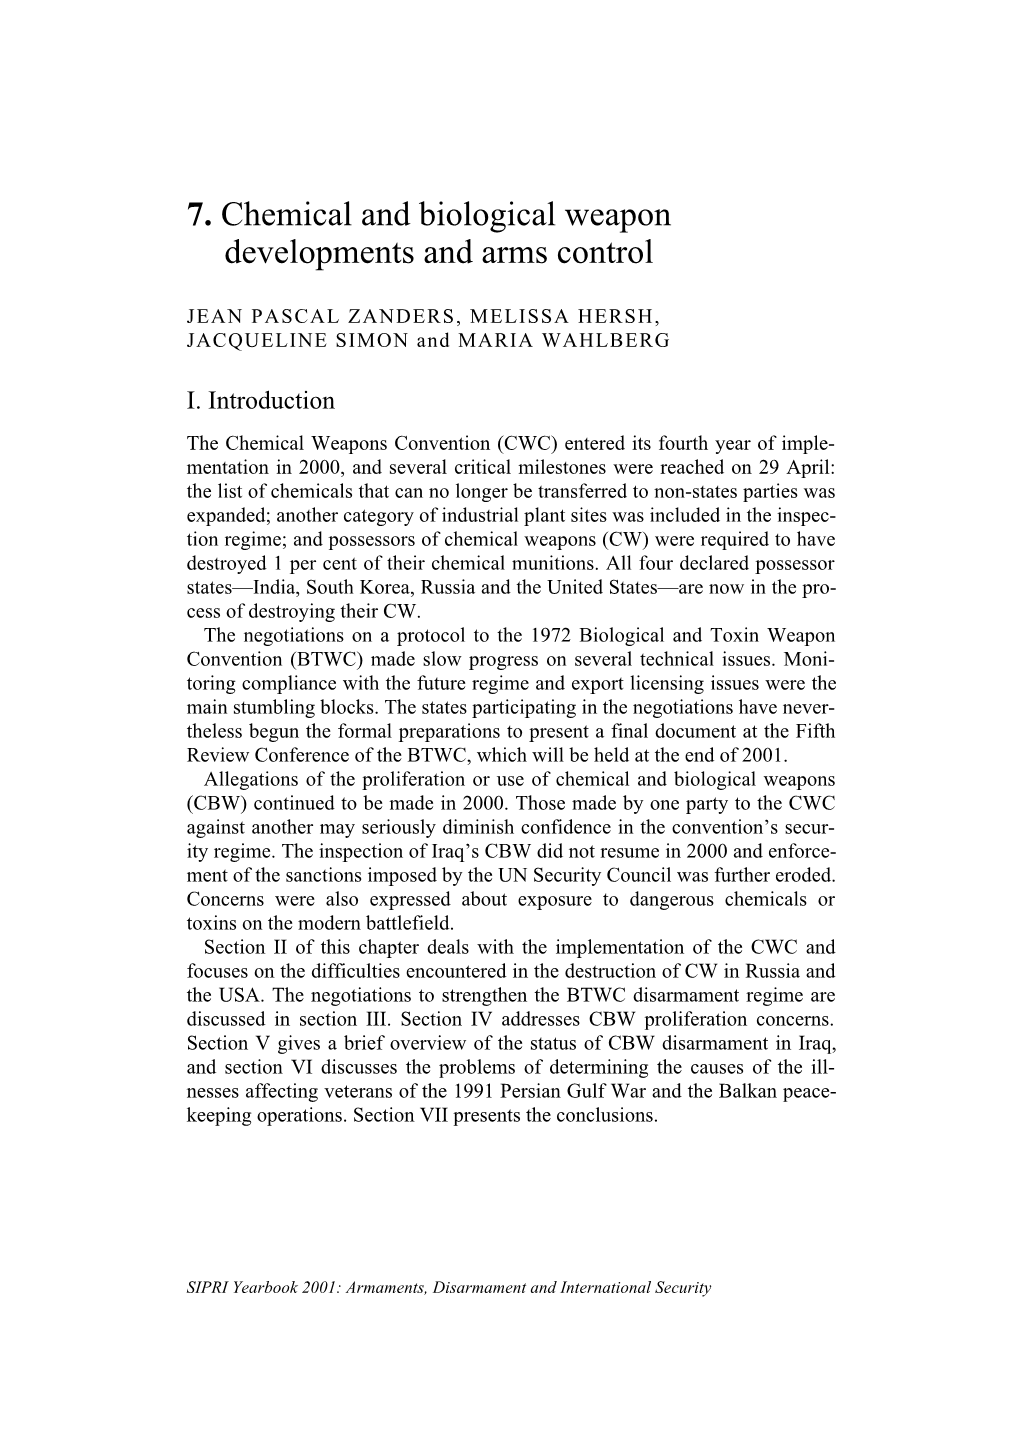 Chemical and Biological Weapon Developments and Arms Control